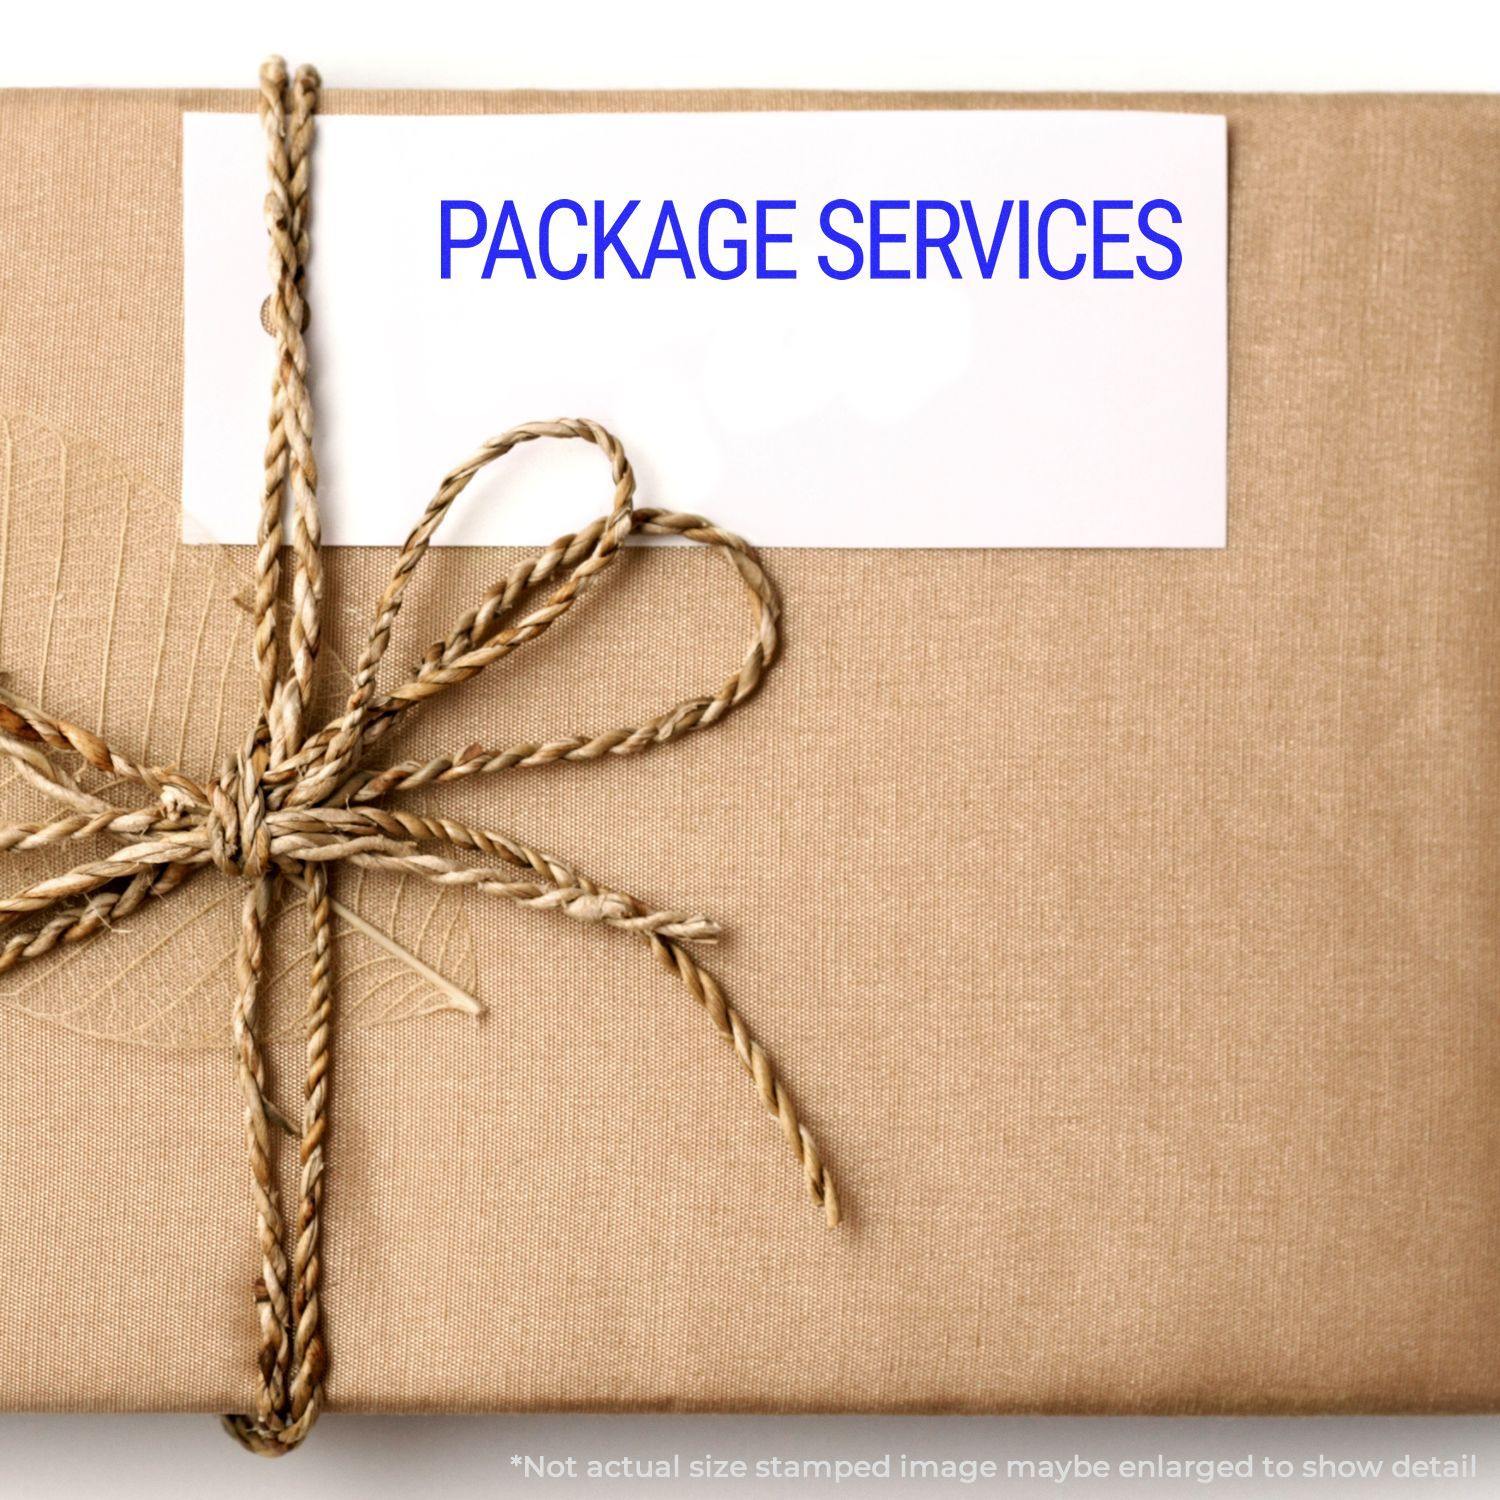 A stock office rubber stamp with a stamped image showing how the text "PACKAGE SERVICES" in a large font is displayed after stamping.